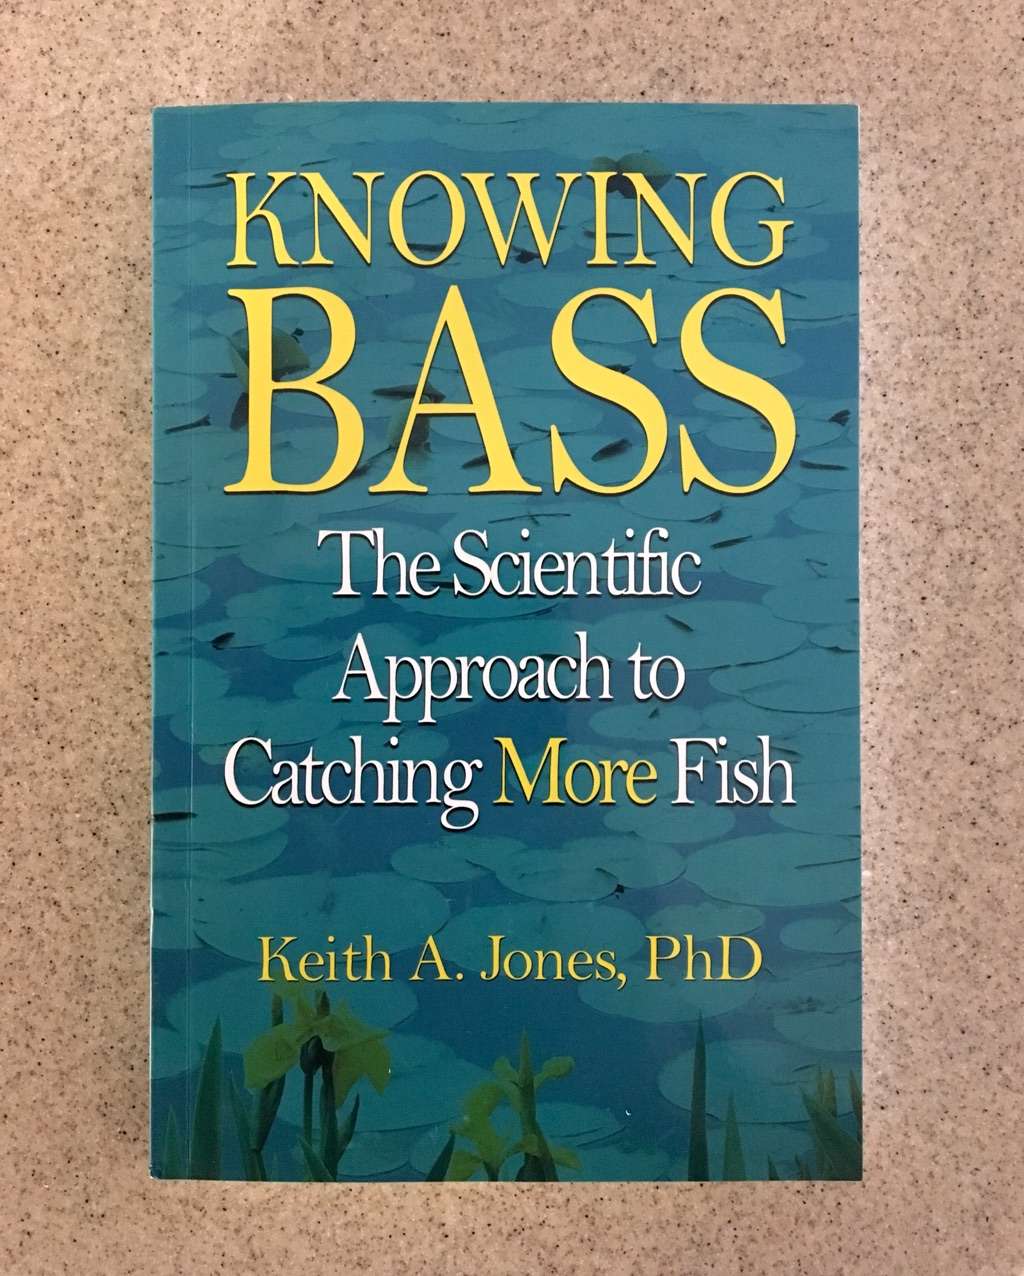 Book Recommend? - General Bass Fishing Forum - Bass Fishing Forums